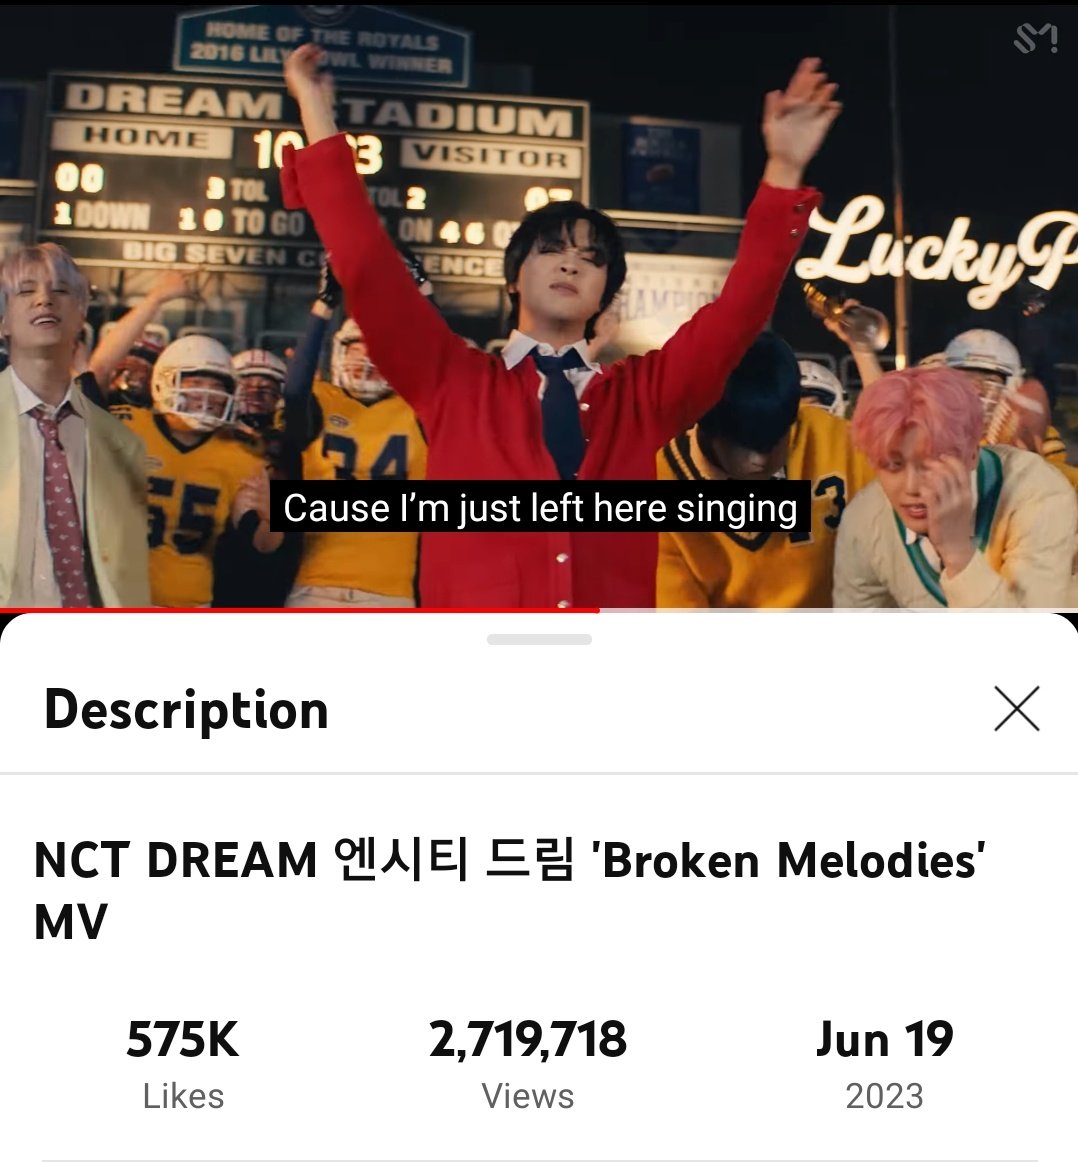 Let's aim for 3M as fast as possible, shall we! Cmon Dreamzens we can do it, less than 300k to go🔥

youtu.be/2R_S5TgDWMY

#BrokenMelodiesBy7DREAM #NCTDREAM_Broken_Melodies 
#드림만의_청춘_브로큰멜로디스